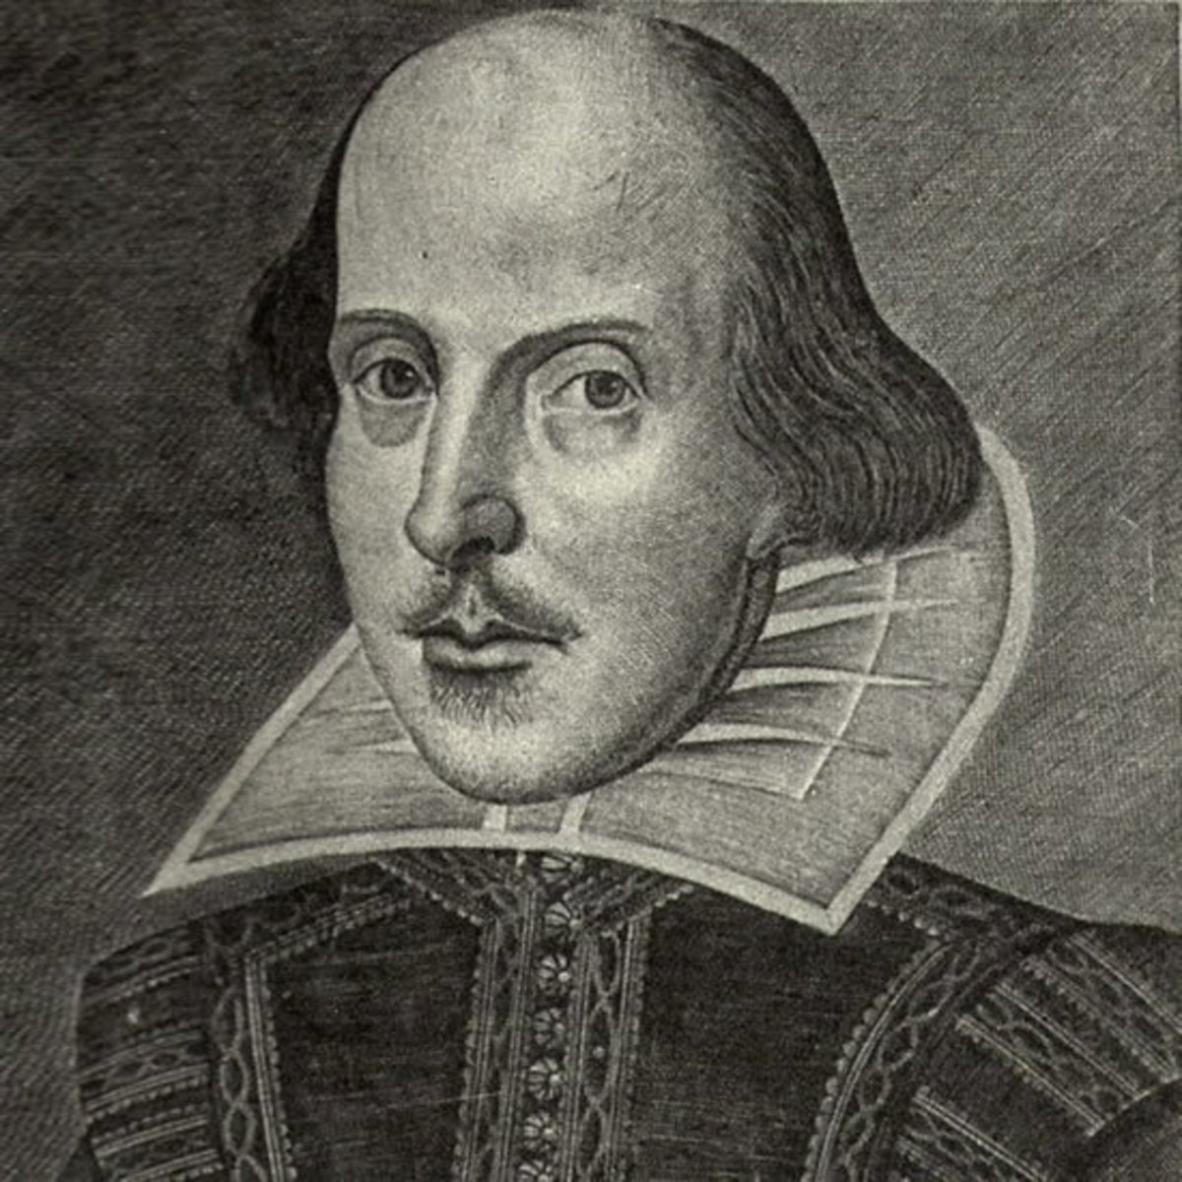 How Did William Shakespeare's Plays Address Universal Human Themes?